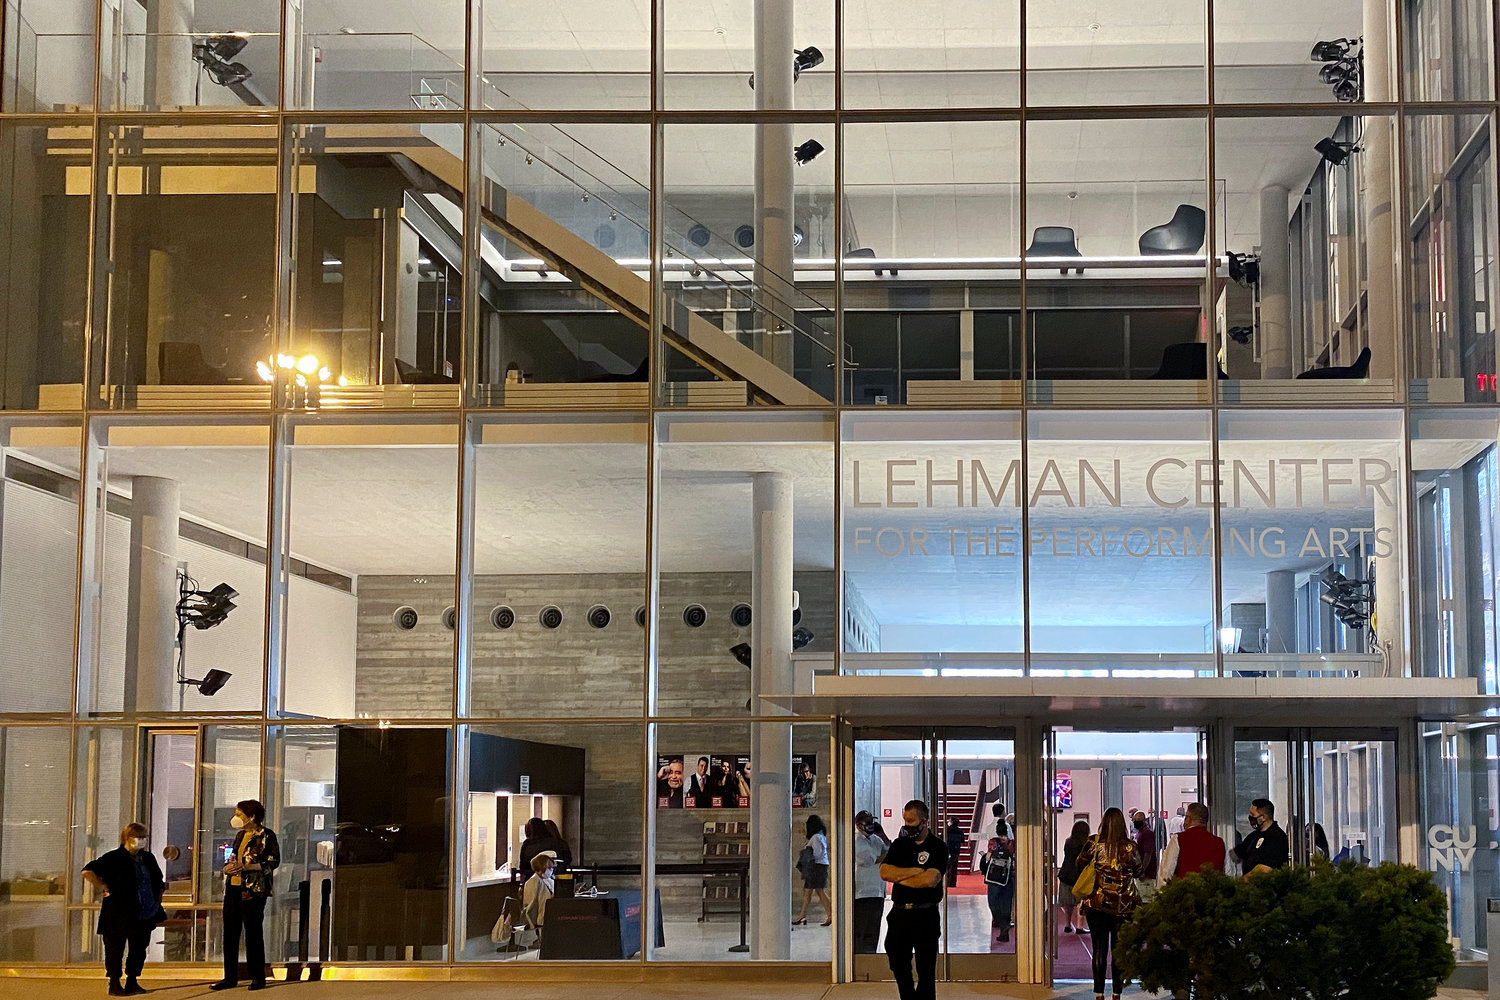 For the first time in 19 months, the front doors of the Lehman Center for the Performing Arts reopened, welcoming audiences to hear Puerto Rican sensation Andy Montañez. When the venue shut down in March 2020, many longtime patrons chose not to accept refunds — a key factor that allowed the center to reopen this month.